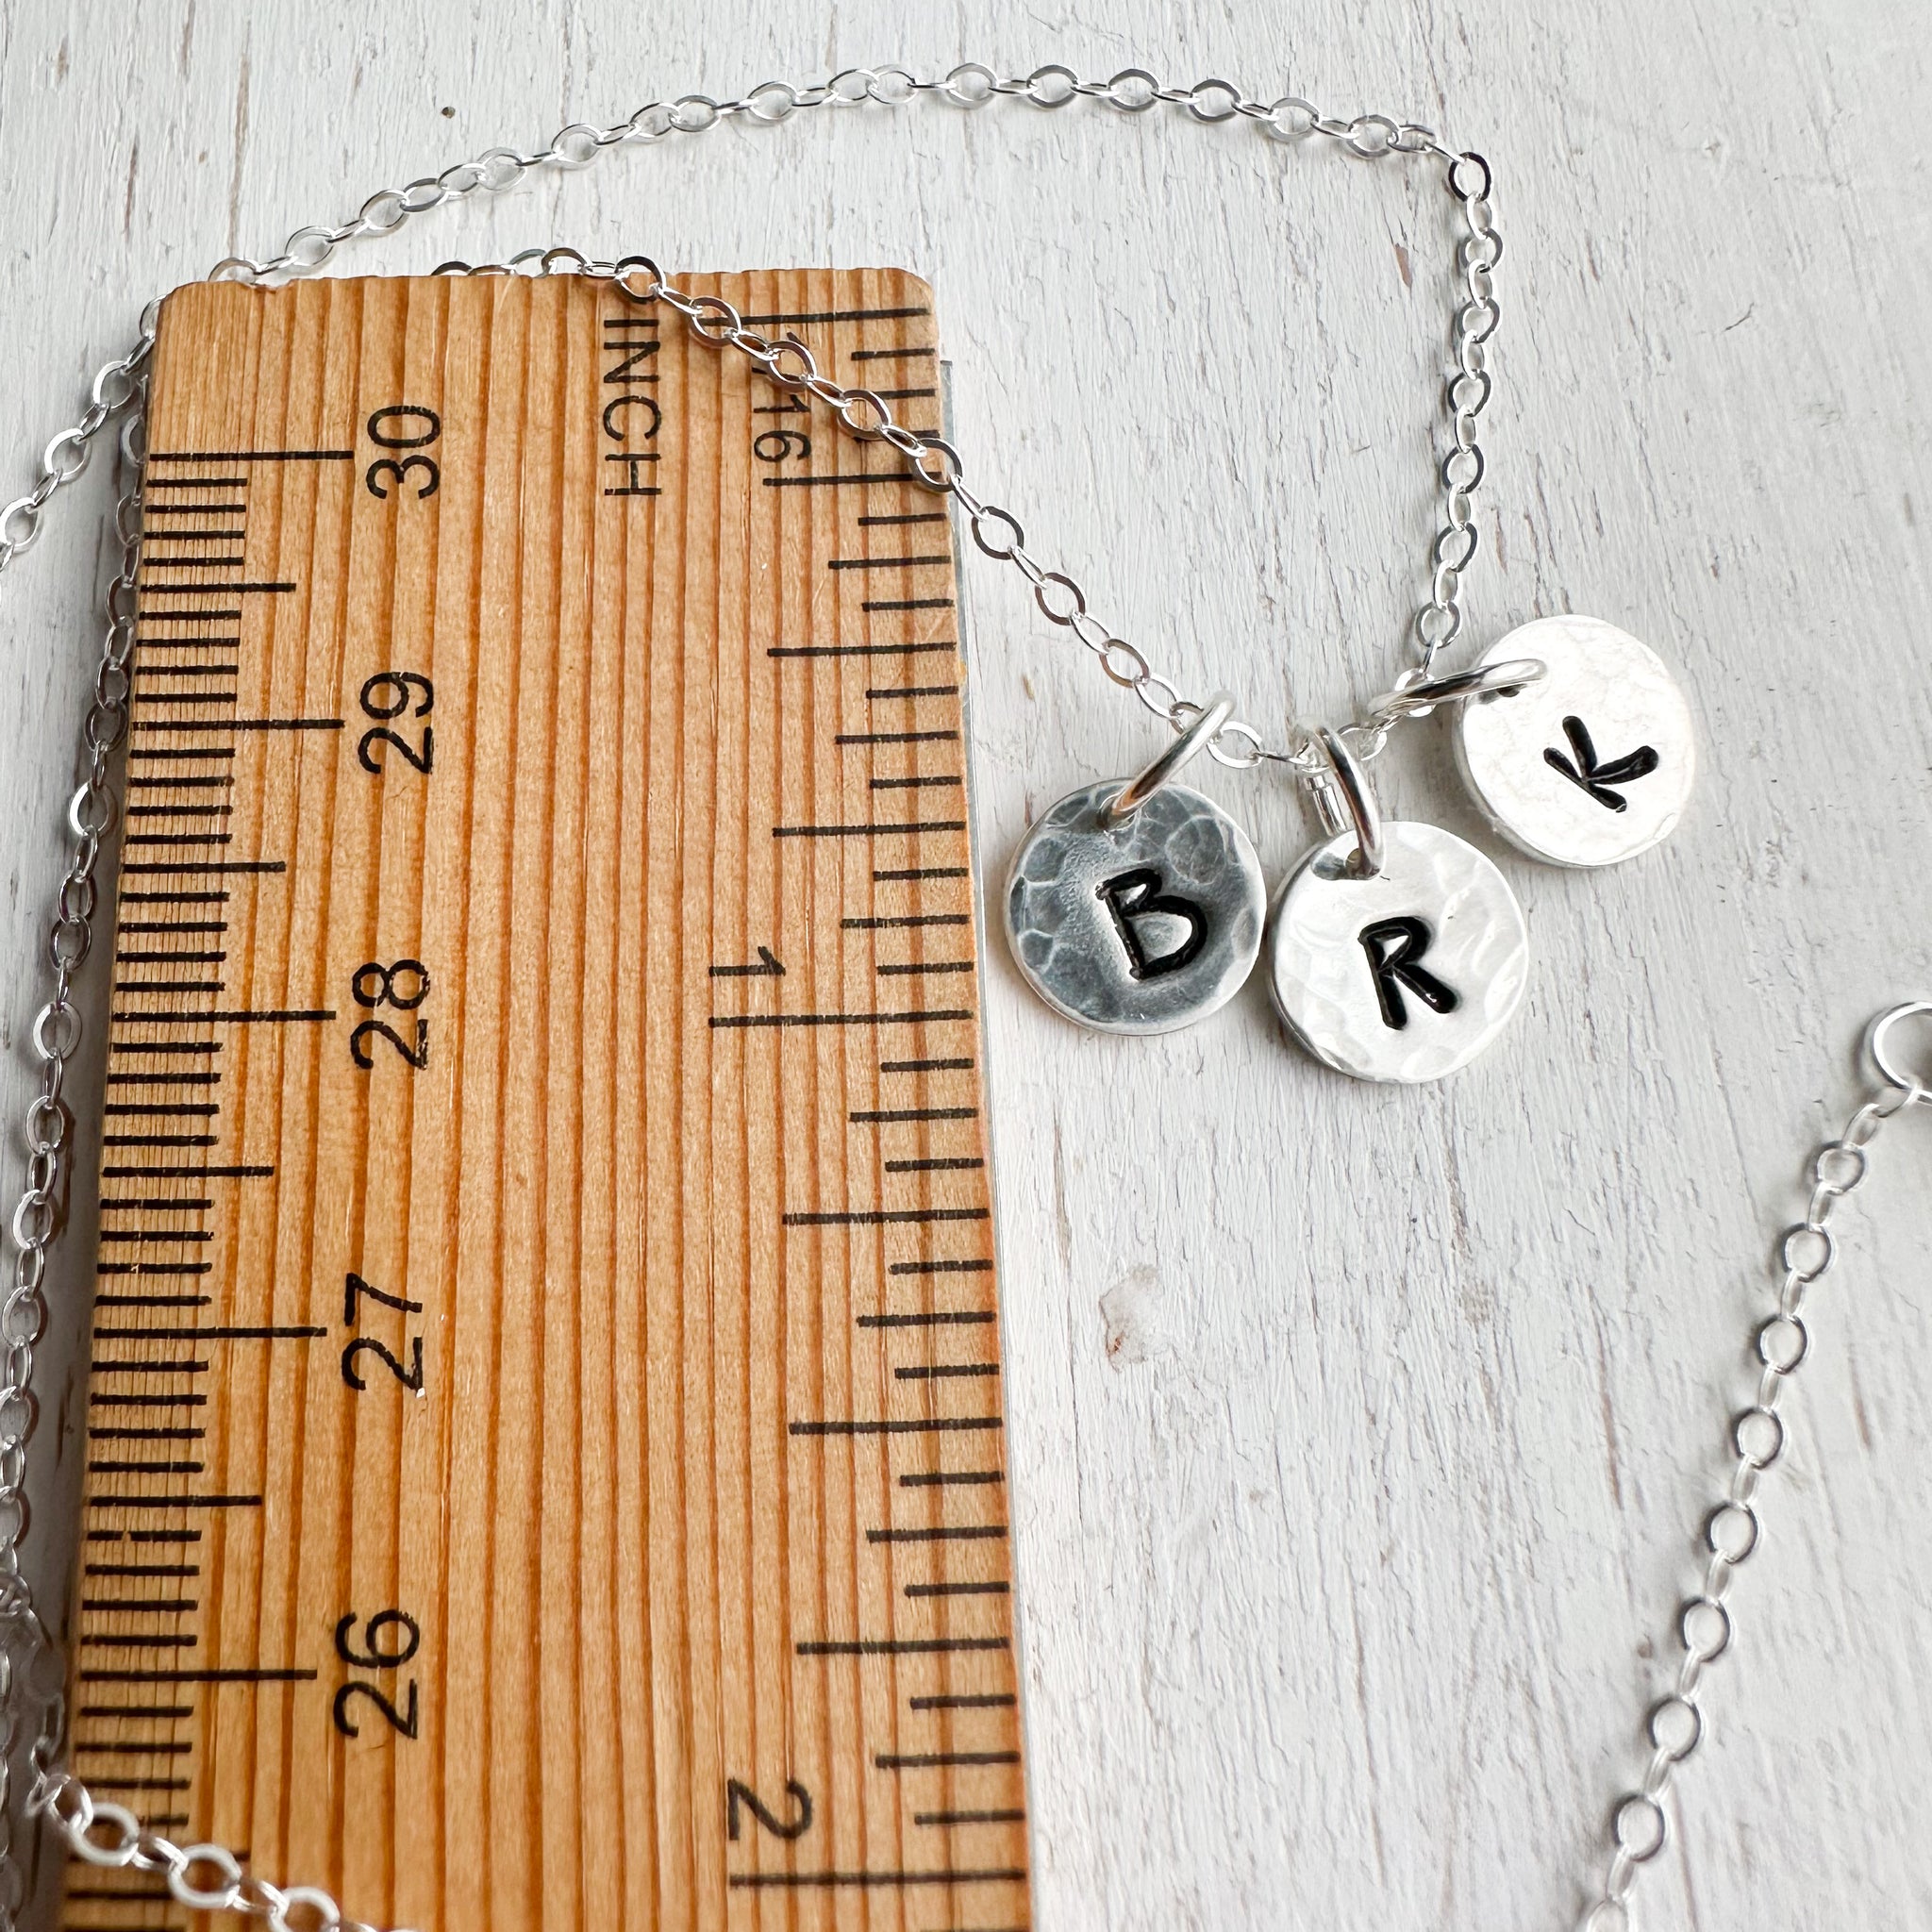 Stamped Sterling Silver Initial Charm Necklace